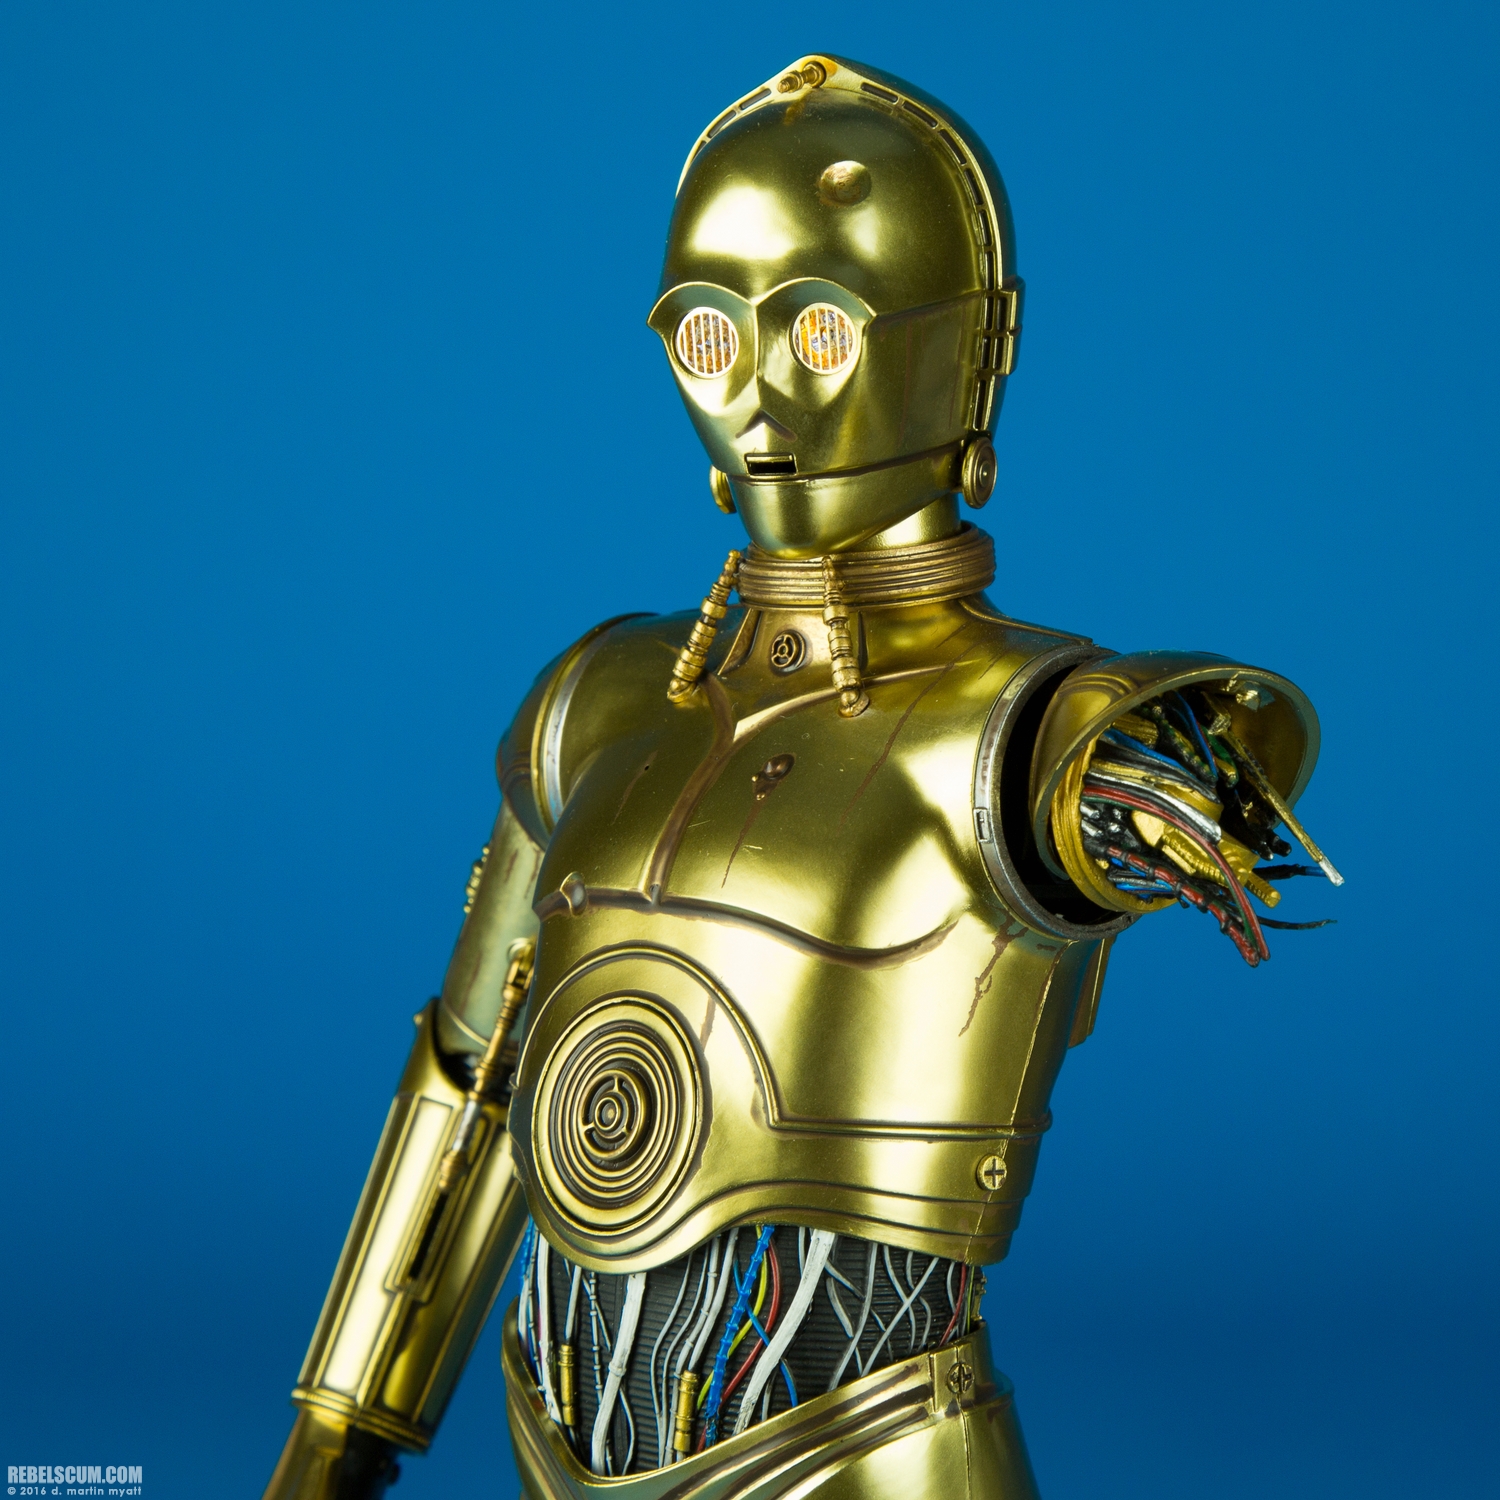 C-3PO-Sixth-Scale-Figure-Sideshow-Collectibles-016.jpg